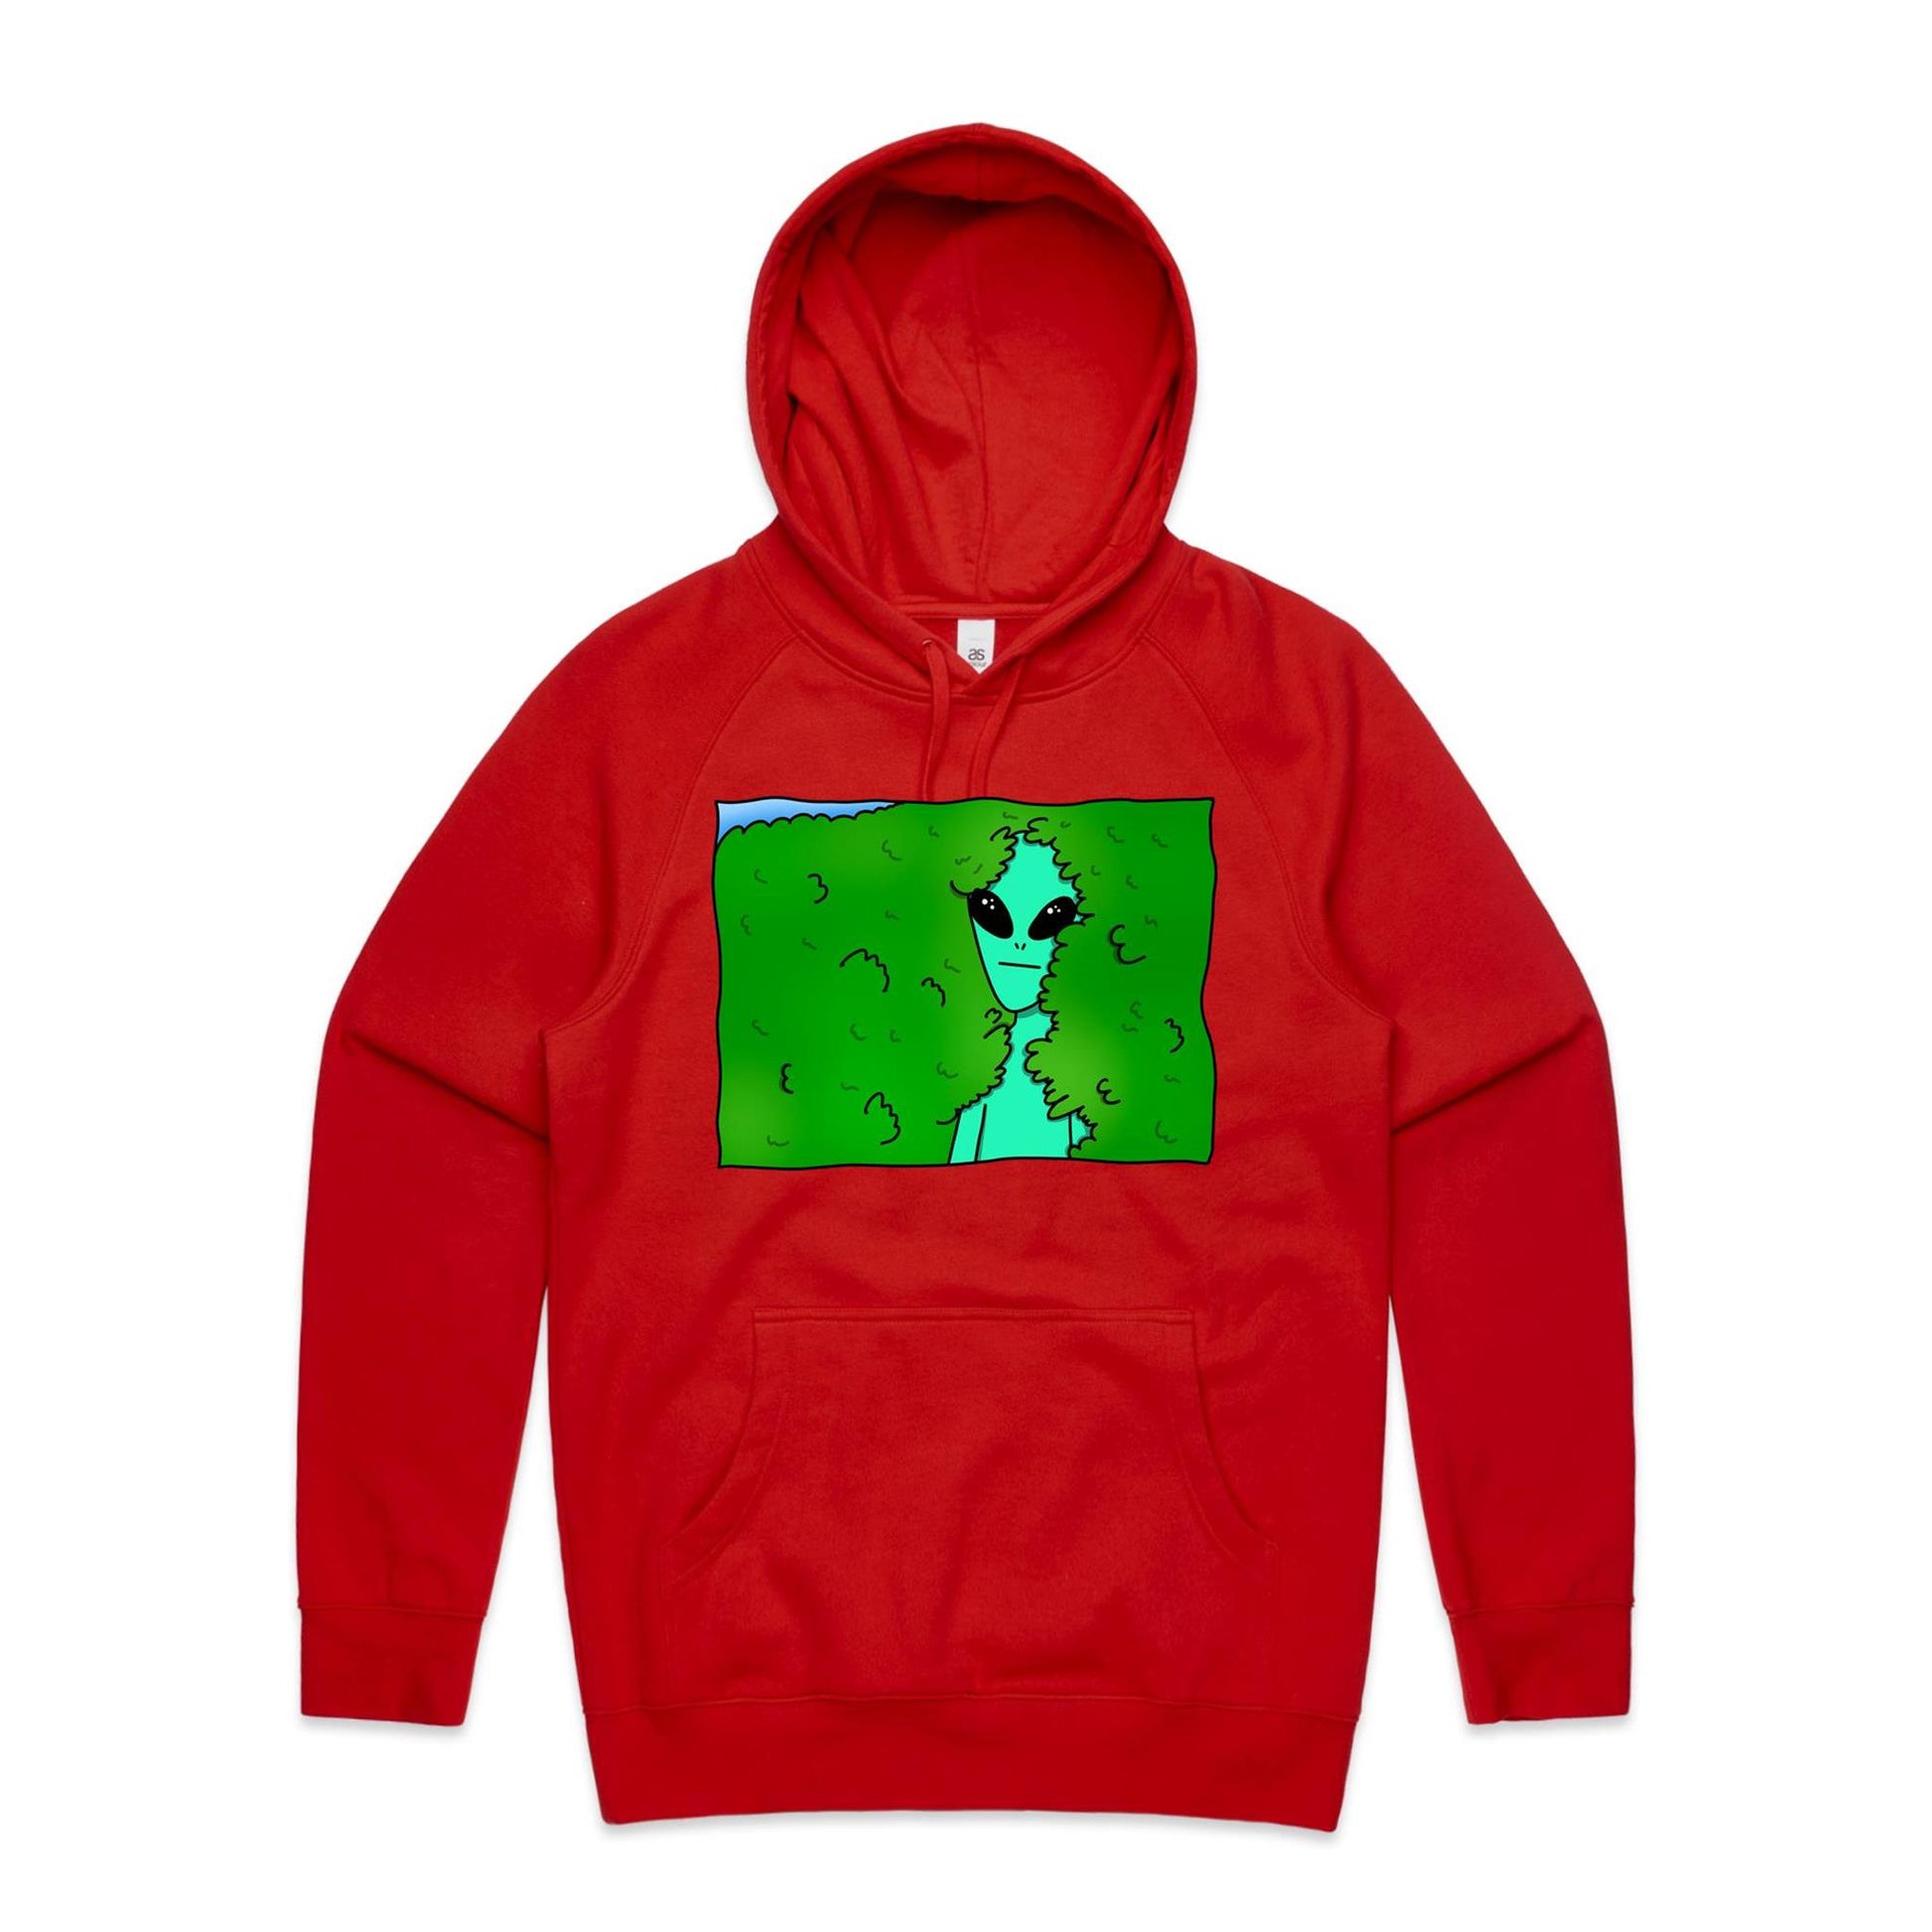 Alien Backing Into Hedge Meme - Supply Hood Red Mens Supply Hoodie Funny Sci Fi